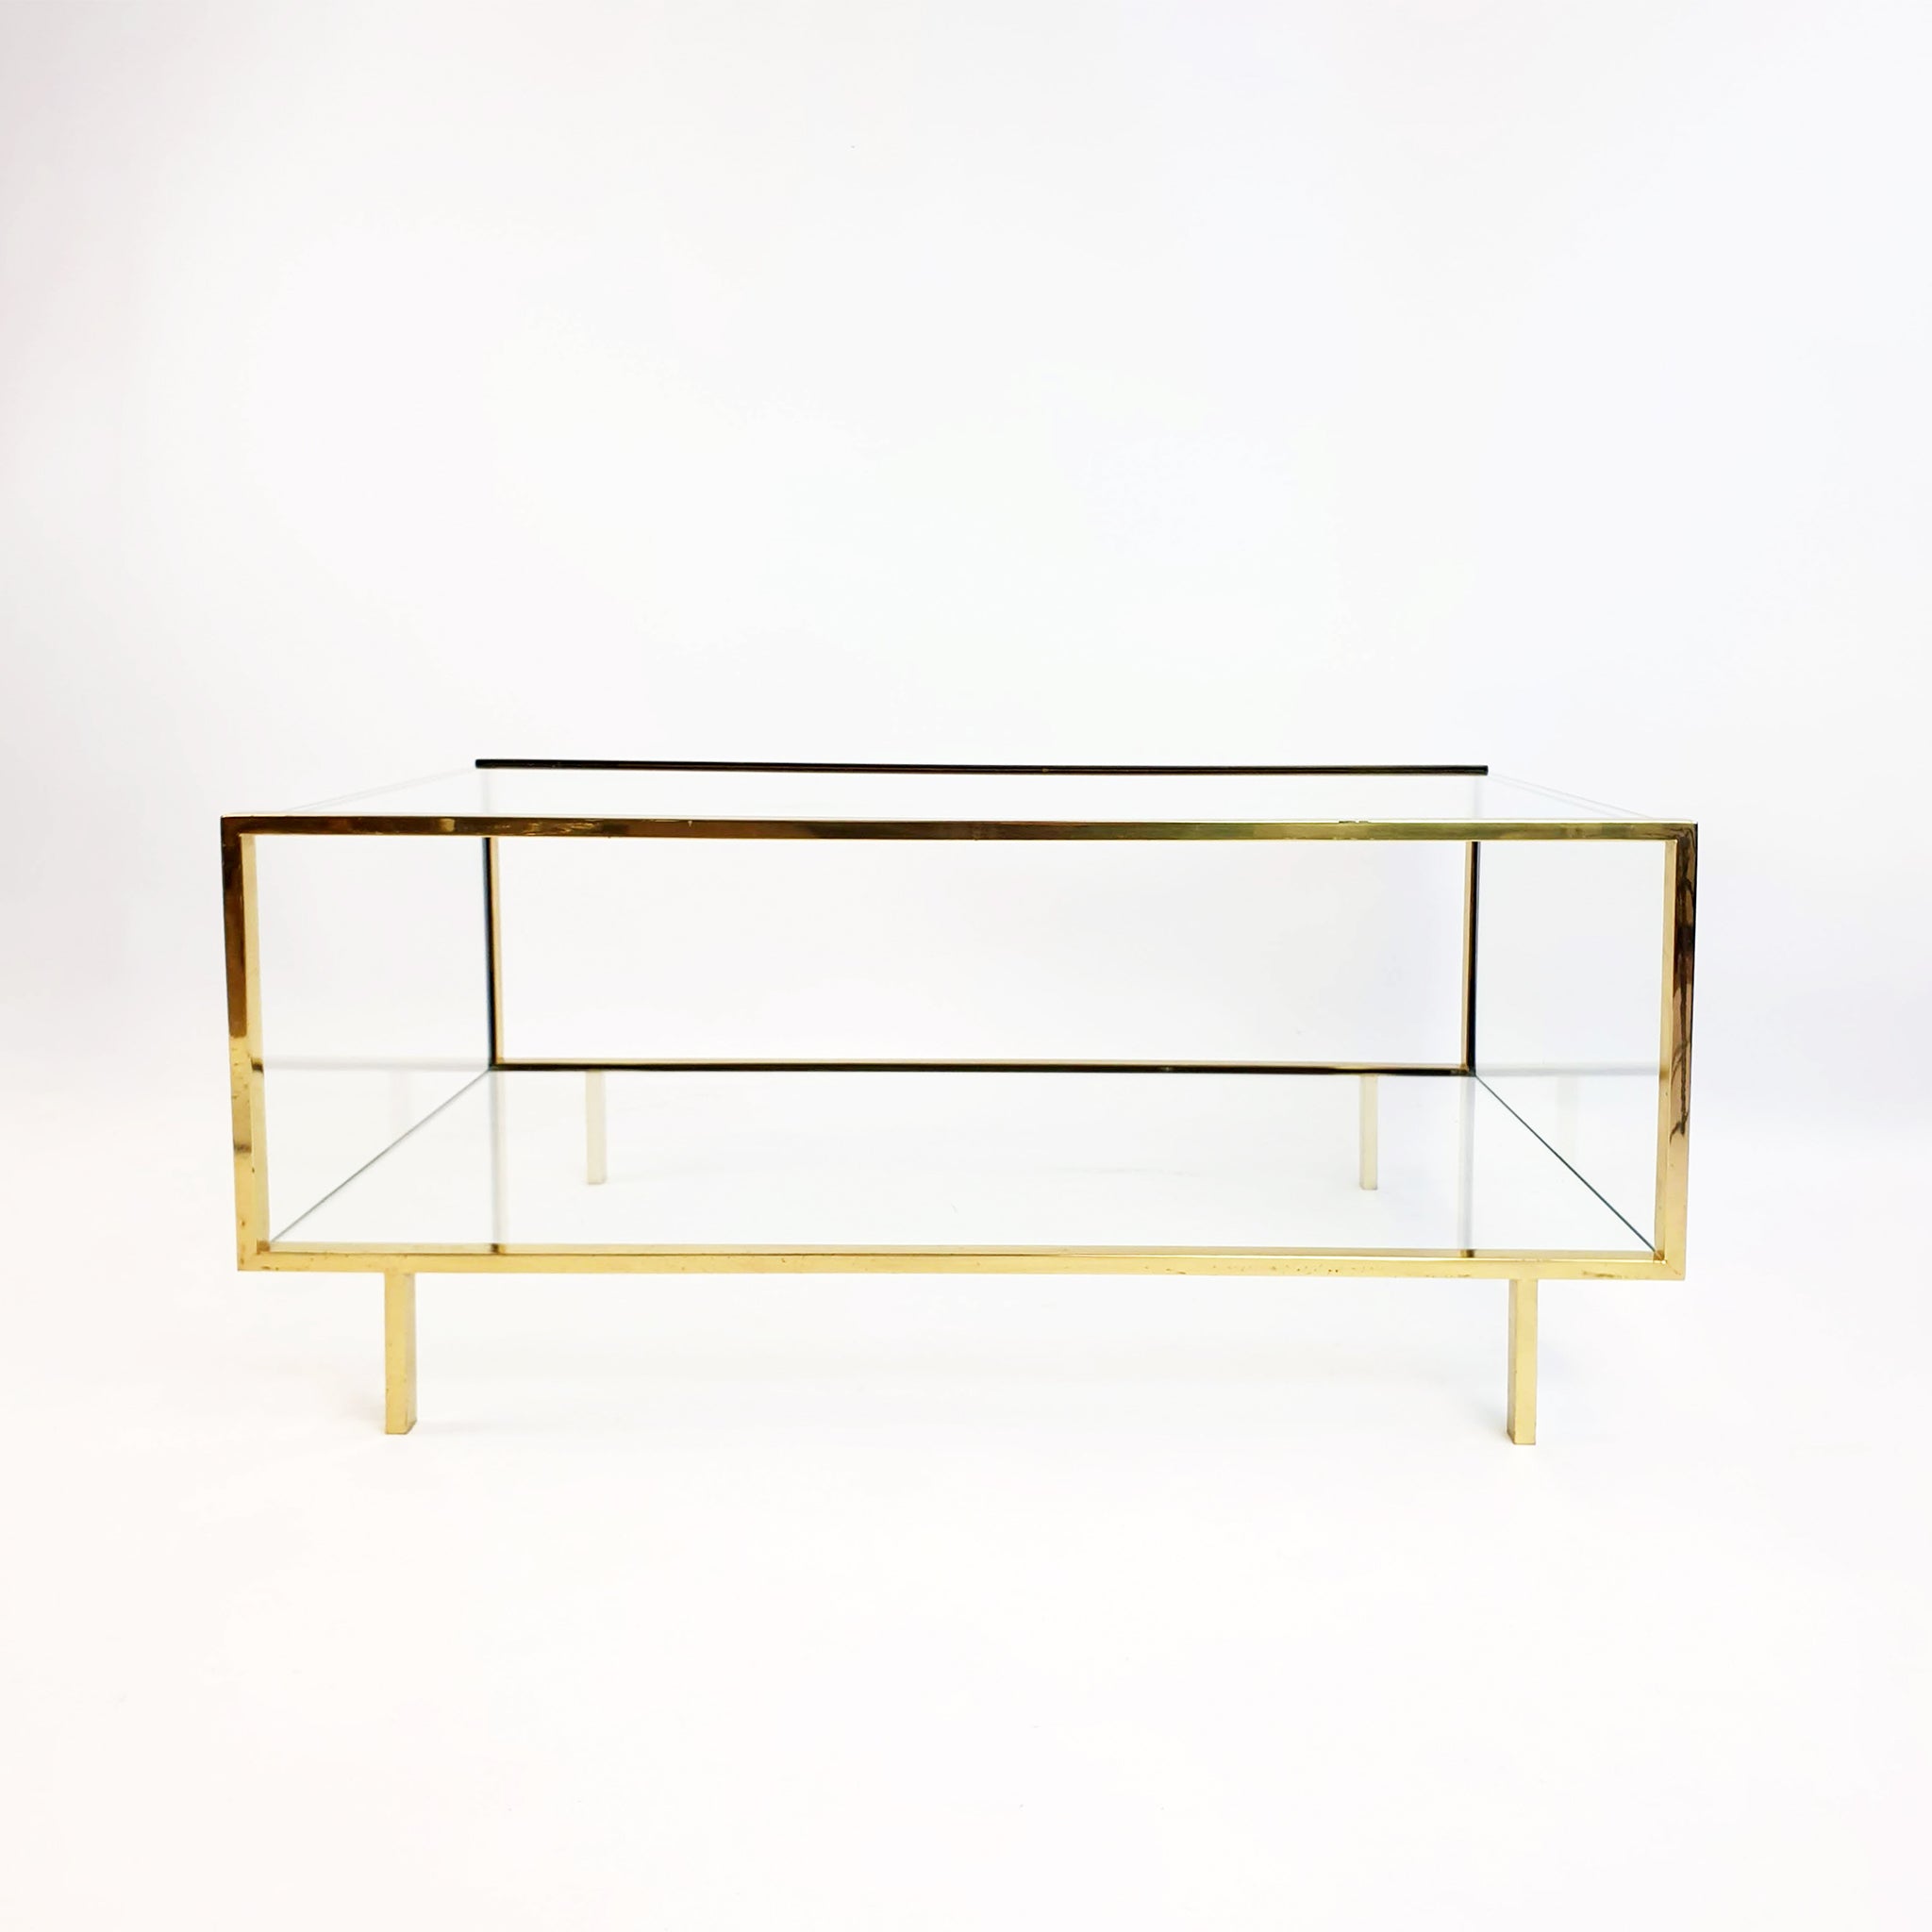 1970s Italian brass and glass coffee table